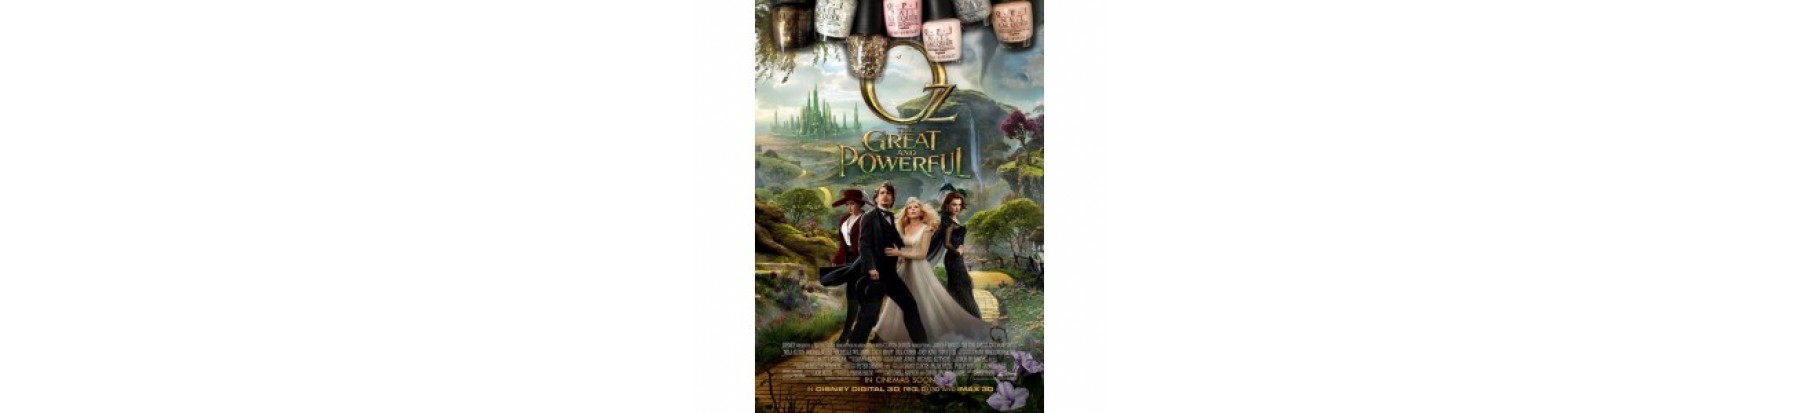 Disney’s Oz the Great and Powerful 2013